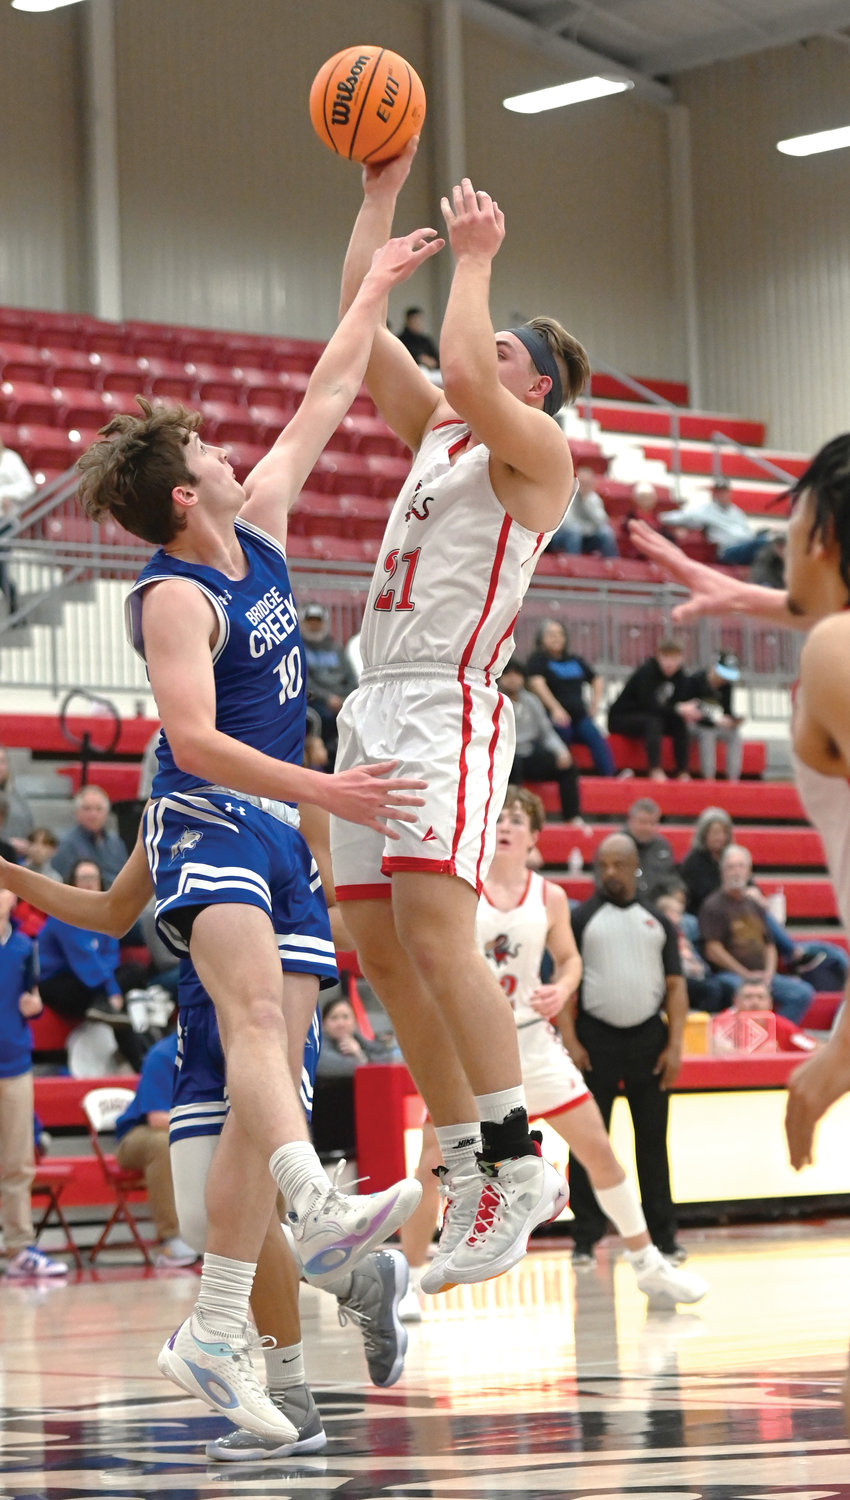 Purcell senior Hayden Ice goes to the basket during the Dragons’ 63-53 win over Bridge Creek. Ice scored 15 points in the game.